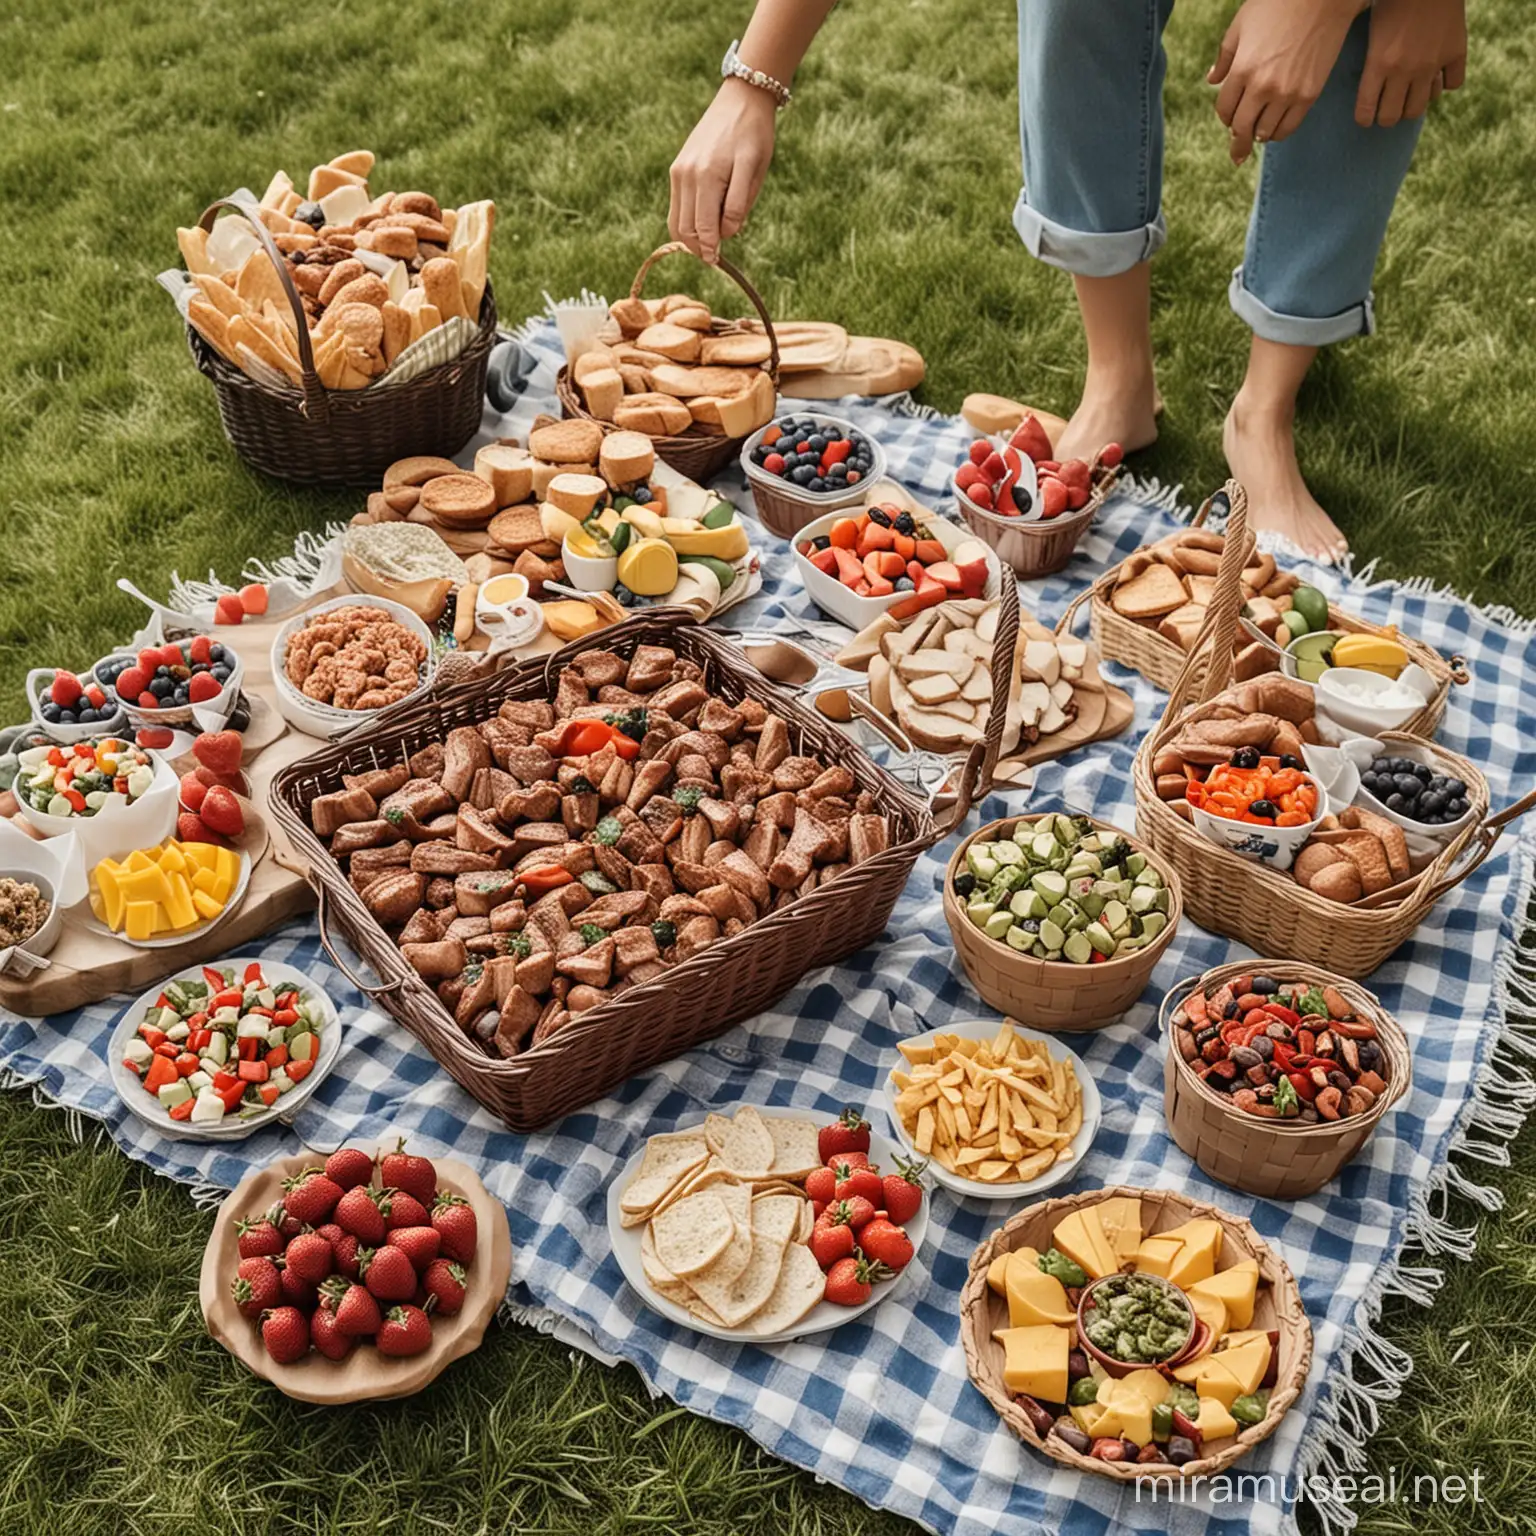 create an instagram post  of someone barbecueing outside 
that will be paired with this caption "Celebrate Memorial Day with a picnic feast! 🧺🇺🇸 Pack your baskets with delicious bites and enjoy the outdoors with loved ones. What are your picnic essentials? #MemorialDayPicnic"


